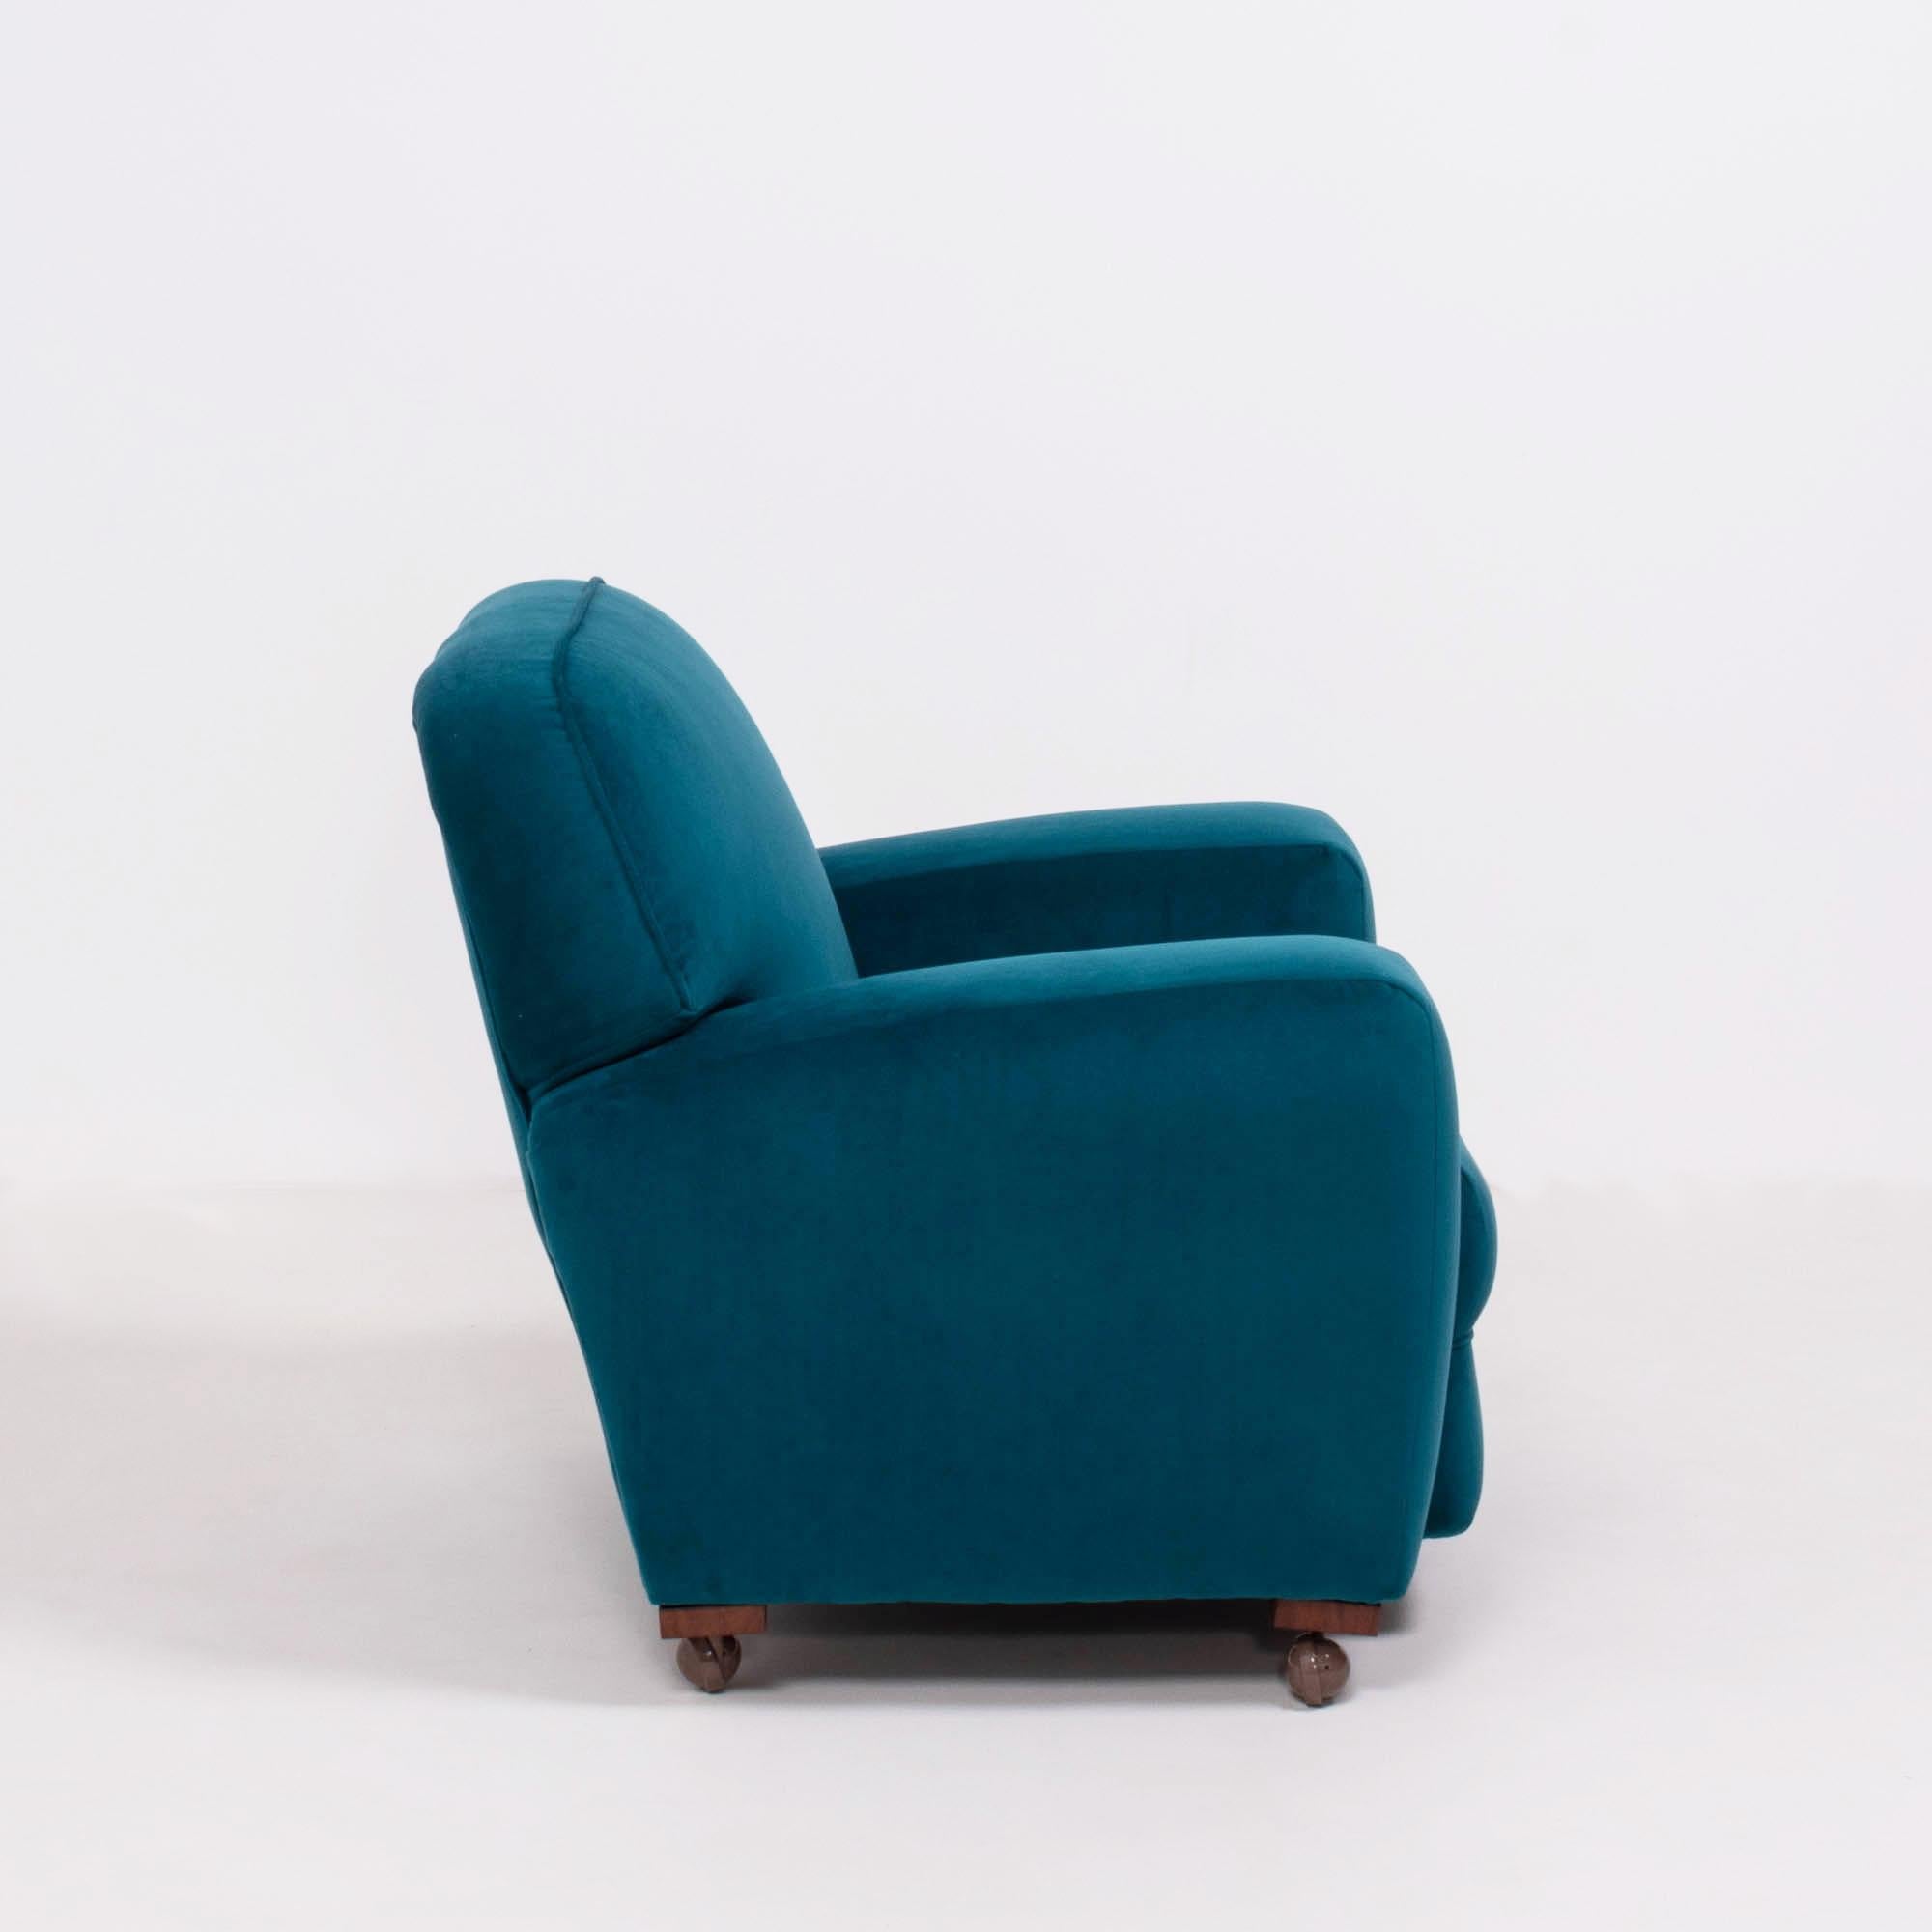 Mid-20th Century Original 1930s Art Deco Curved Blue Teal Velvet Armchairs, Newly Upholstered